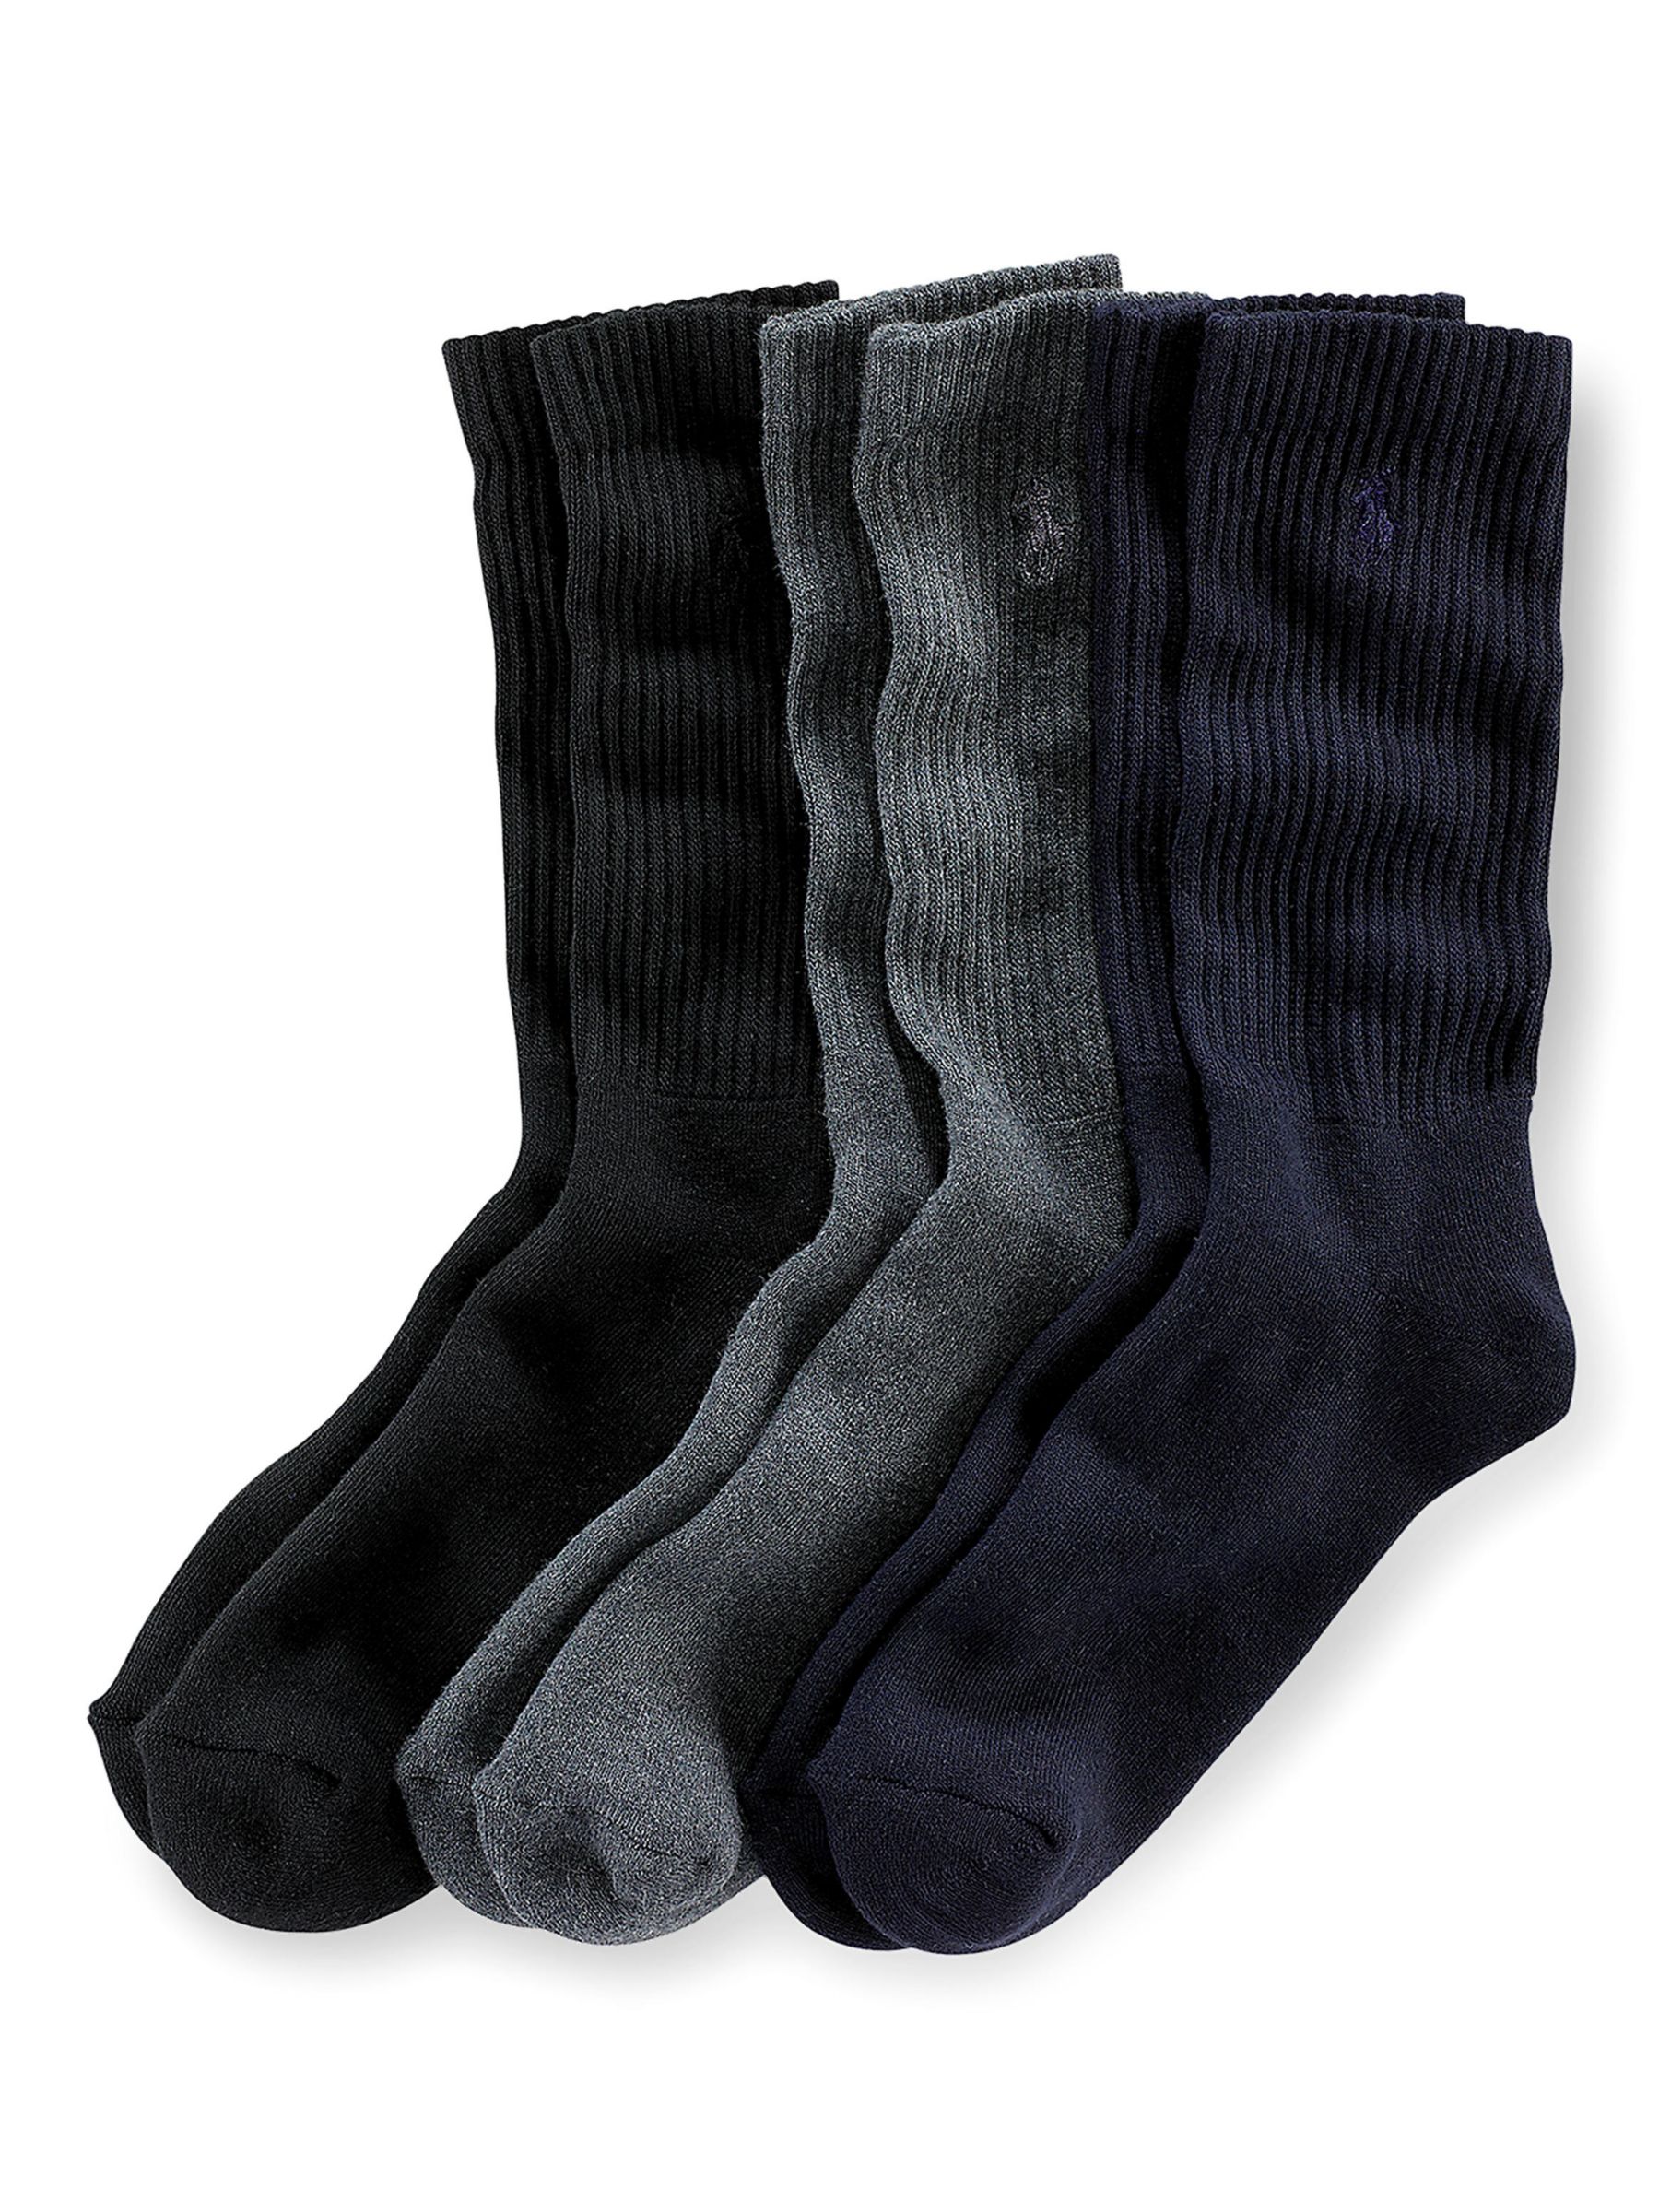 Buy Polo Ralph Lauren Cotton Rich Socks, Pack of 3, One Size, Black/Charcoal/Navy Online at johnlewis.com